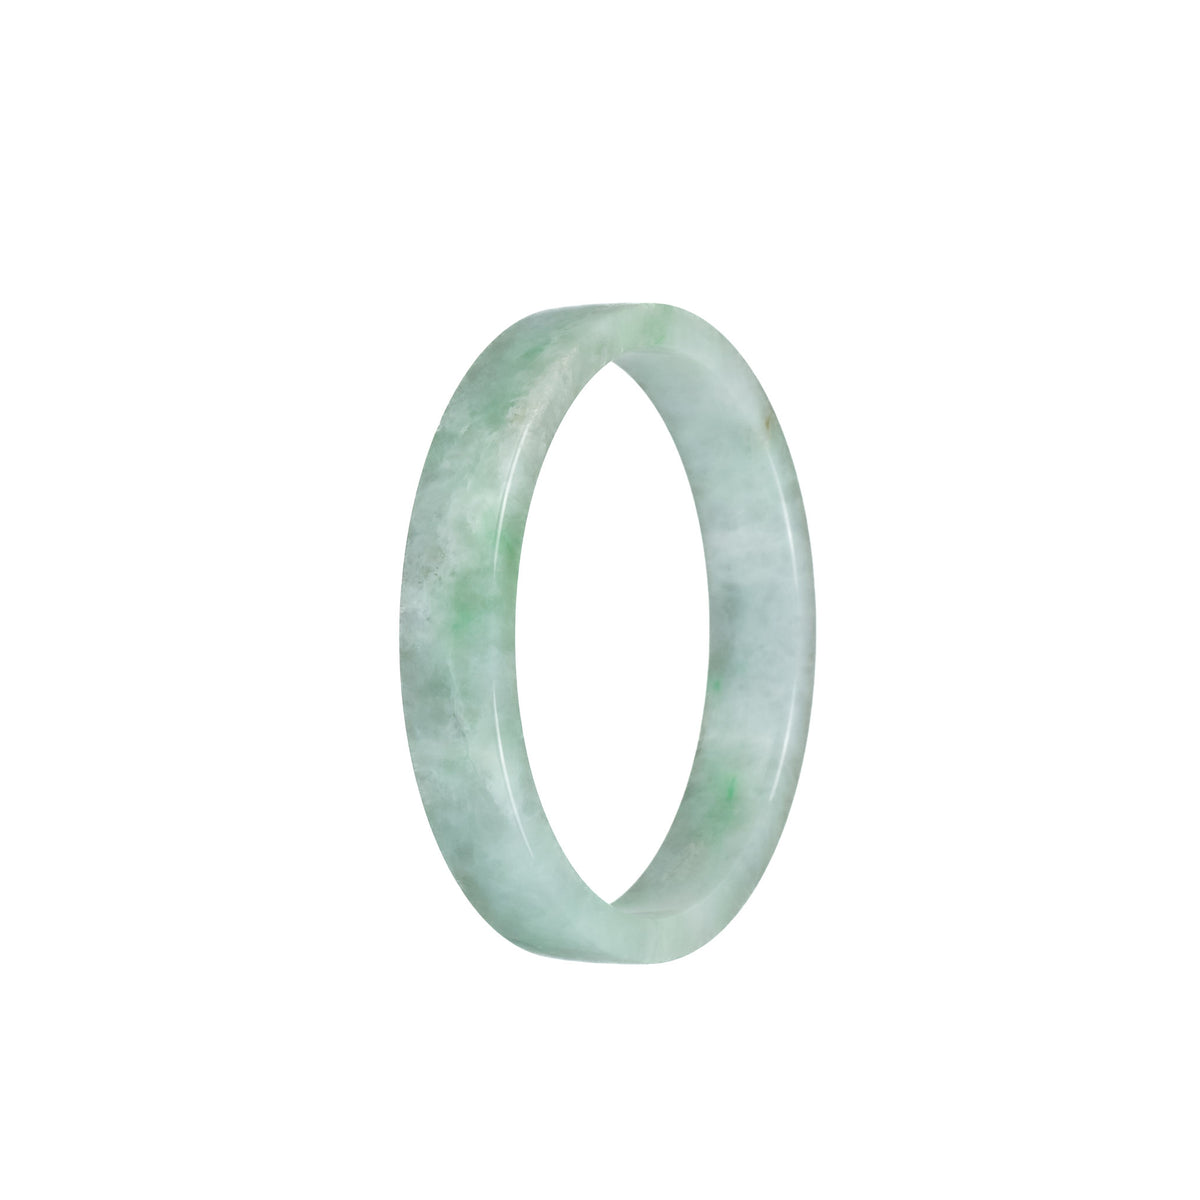 Certified Type A Pale Green with Green Pattern Traditional Jade Bangle - 52mm Flat